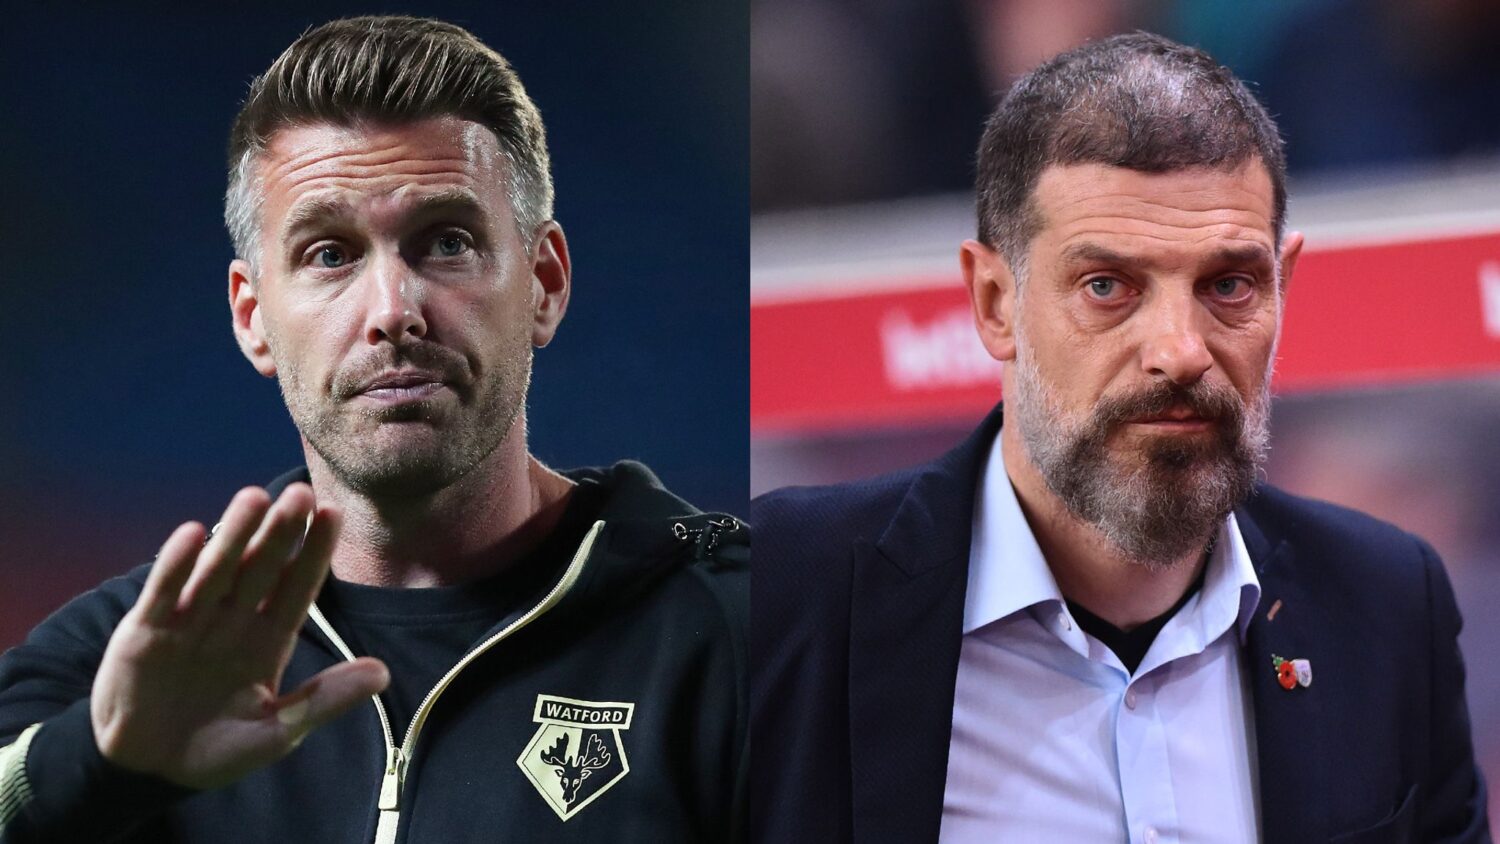 Watford Appoint Slaven Bilic As New Head Coach After Sacking Rob Edwards